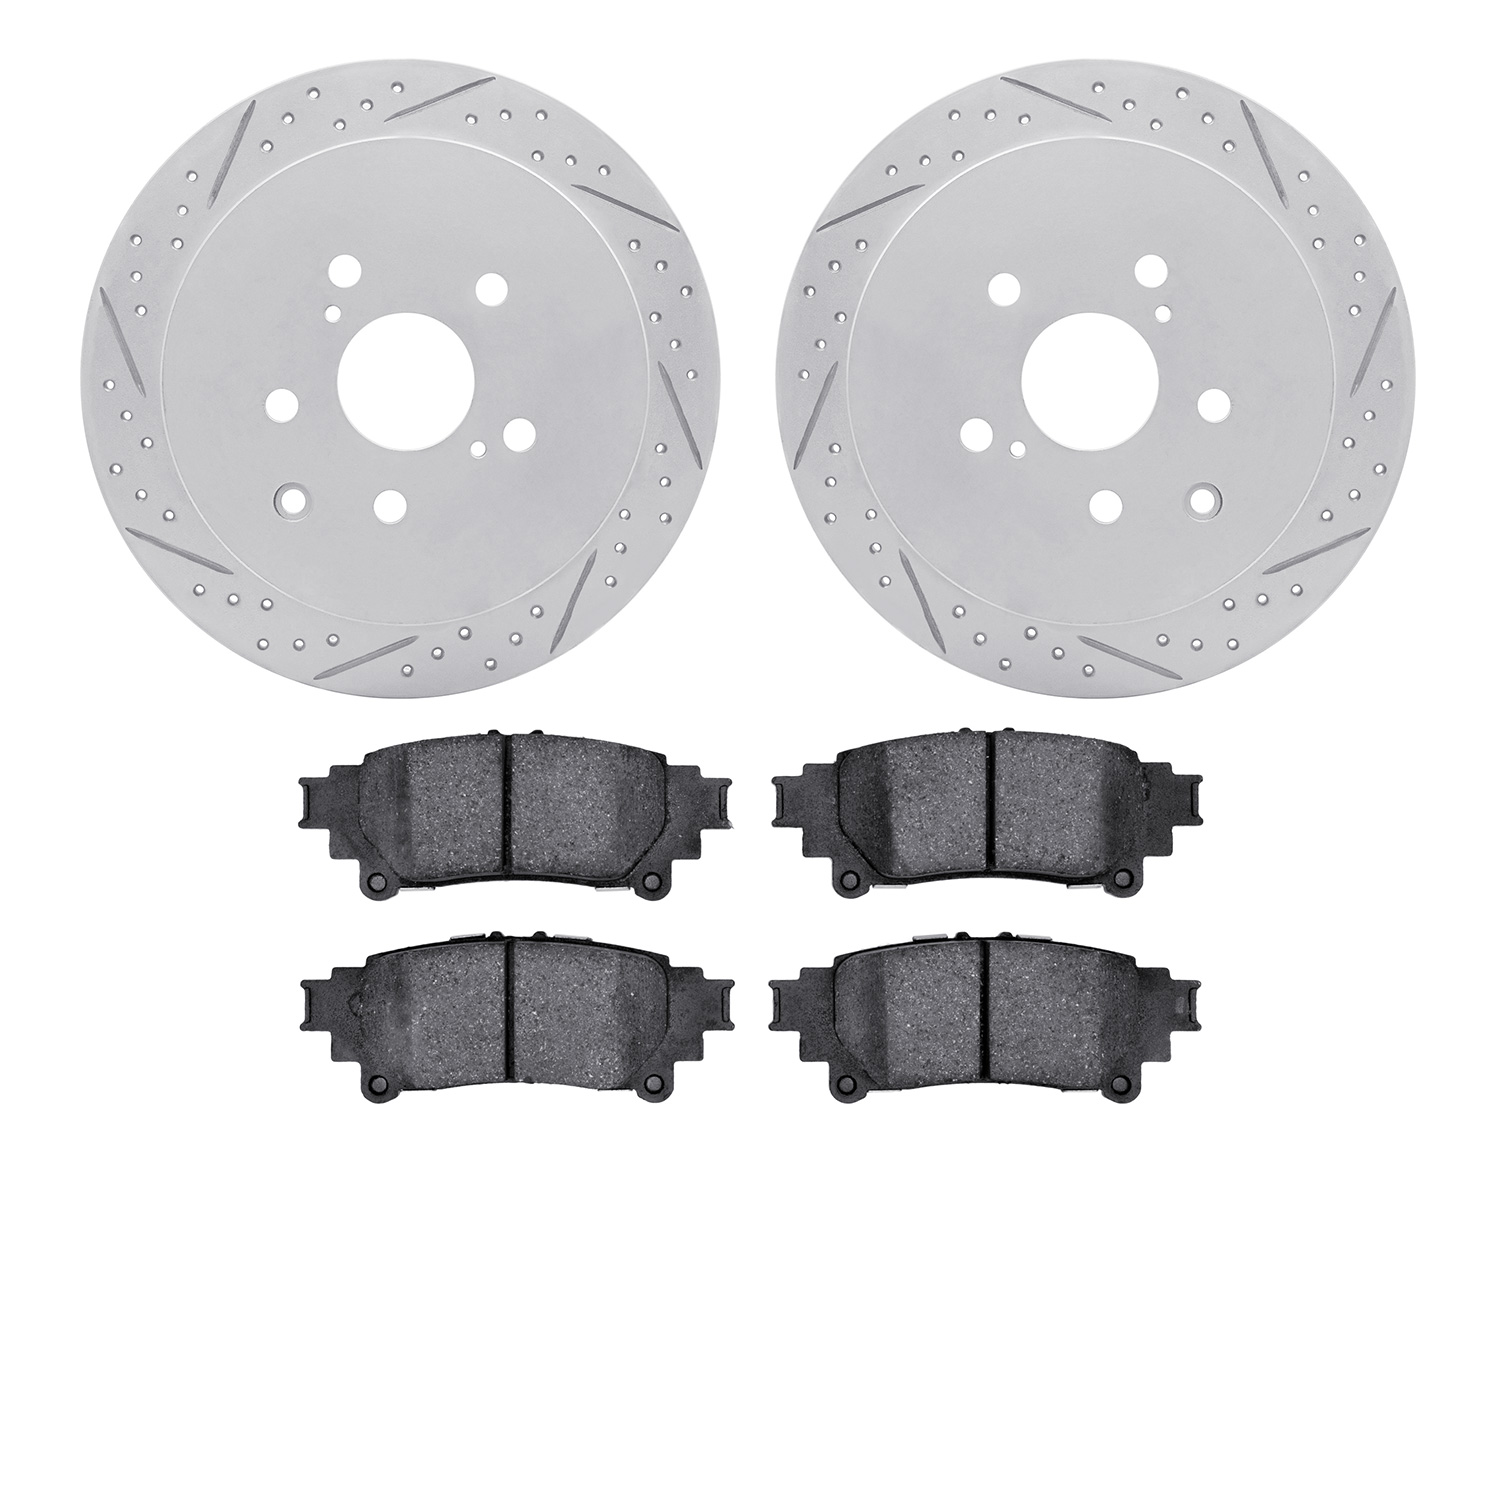 2502-76167 Geoperformance Drilled/Slotted Rotors w/5000 Advanced Brake Pads Kit, 2010-2020 Lexus/Toyota/Scion, Position: Rear